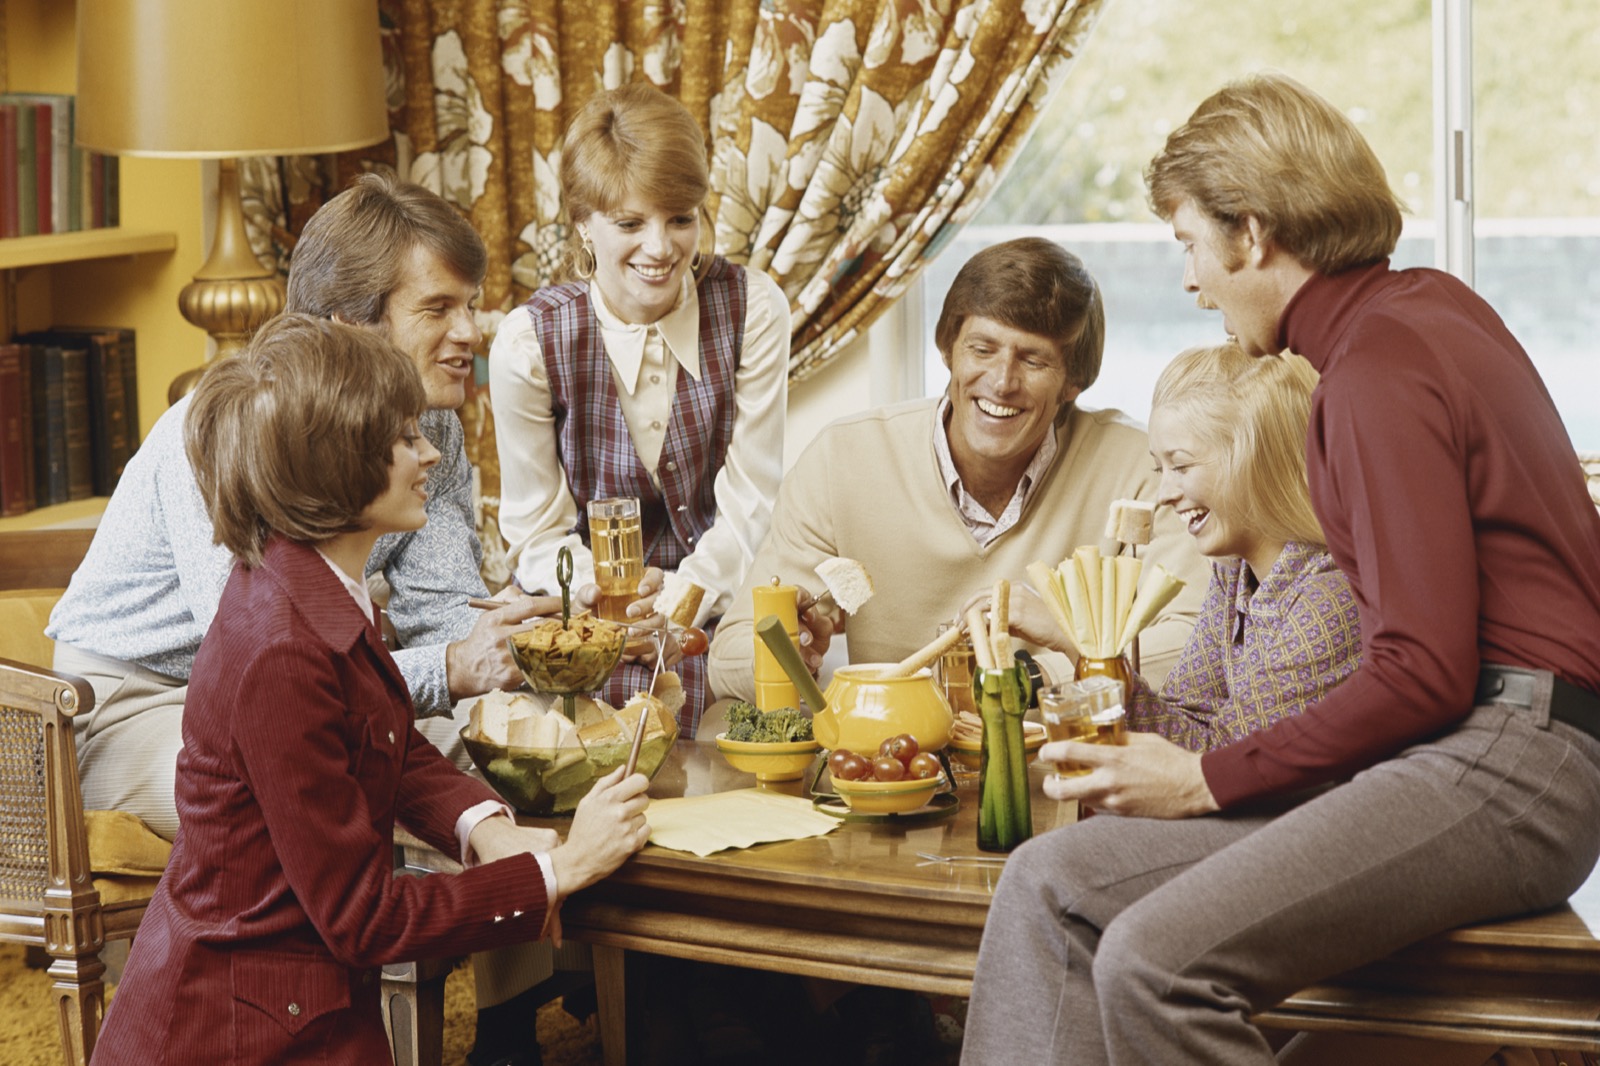 Stop Everything and Take This Quiz to Find Out How Cool You Are 1970s retro meal